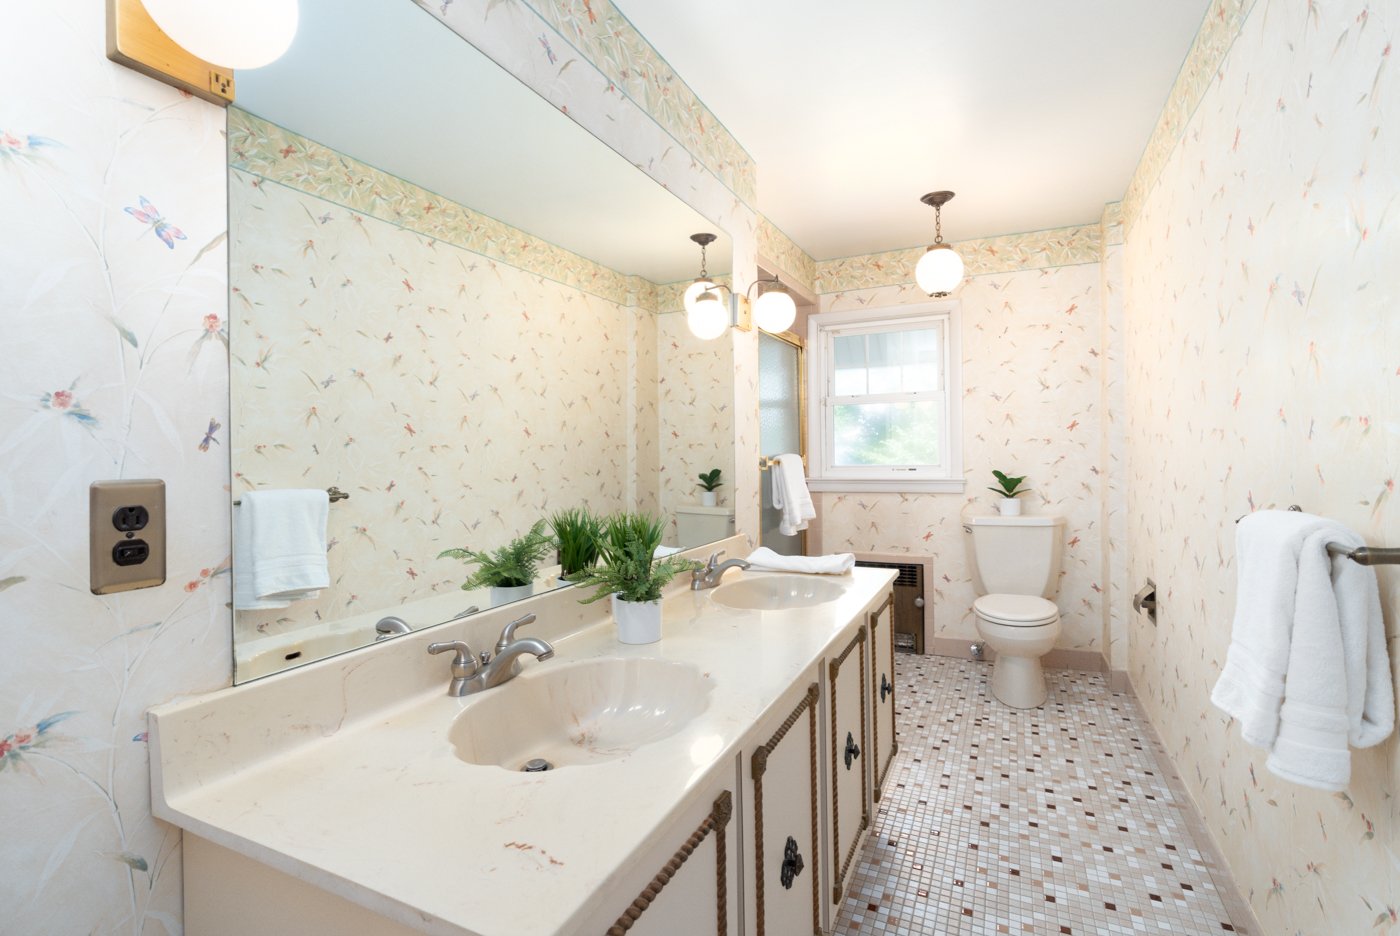 2ND FLOOR BATH 415 Lincoln real estate (Low res)-1.jpg